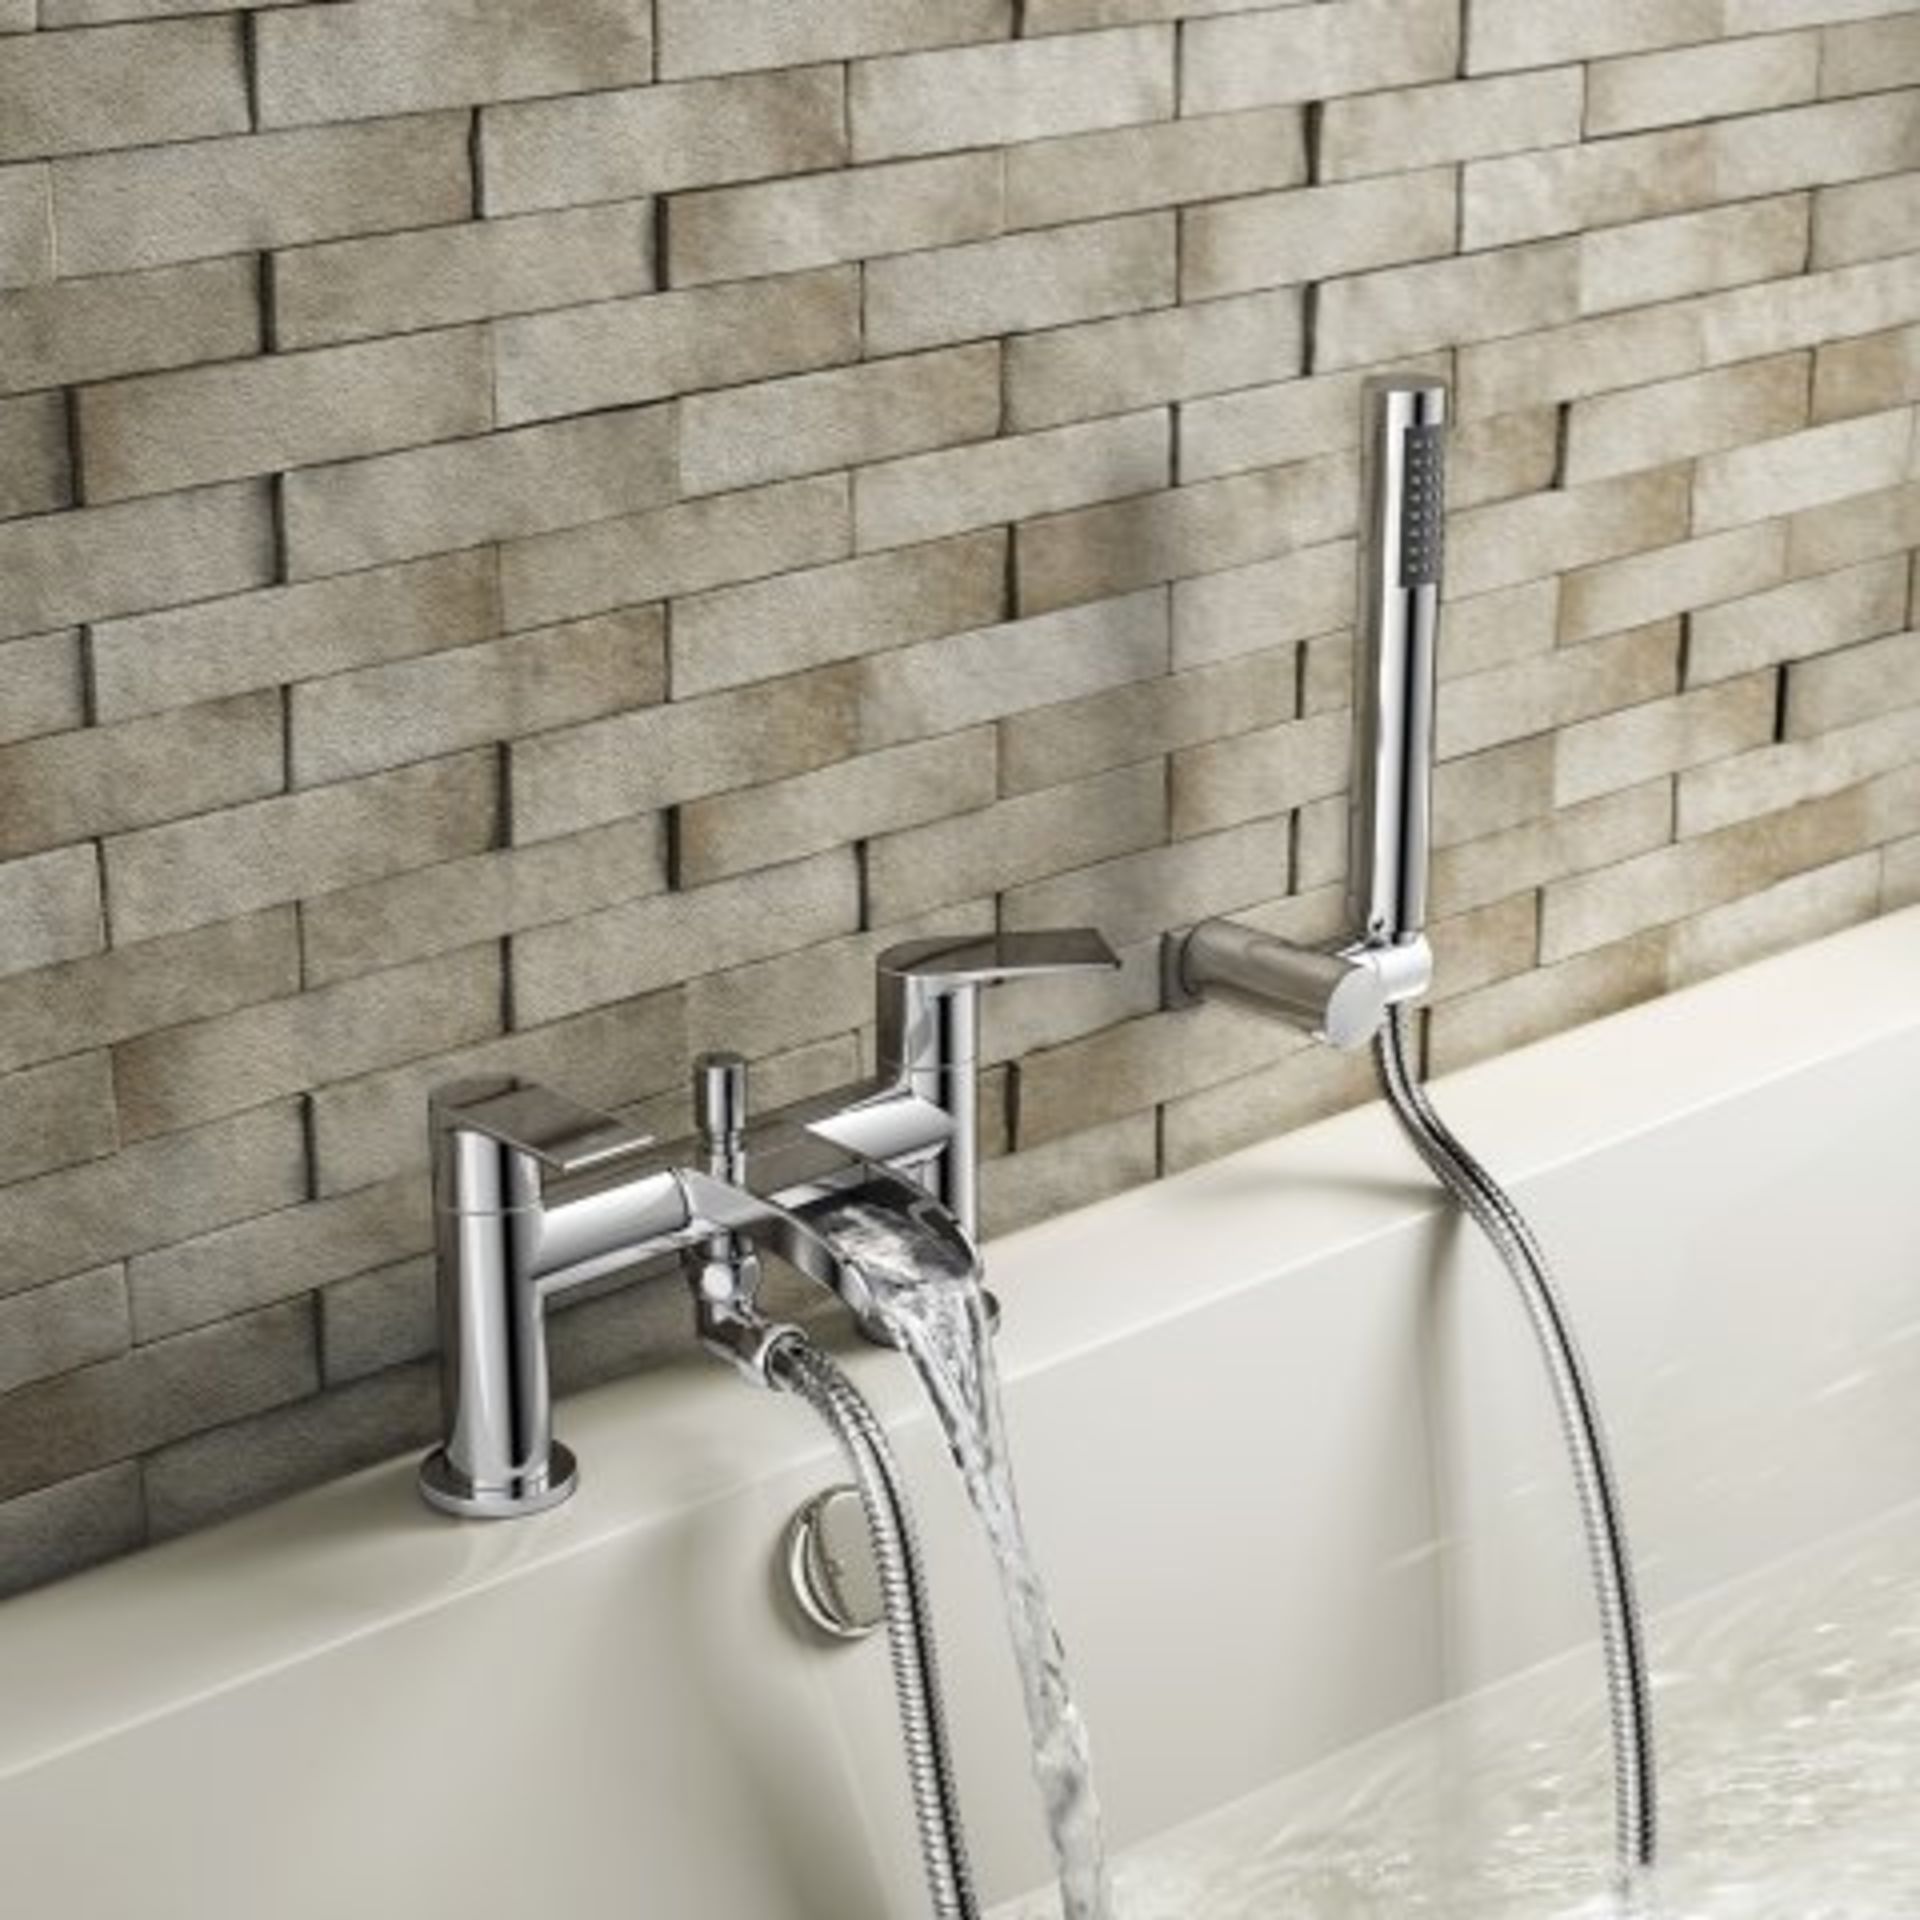 (AA270) Avis II Waterfall Bath Shower Mixer Tap with Hand Held Shower Head Presenting a contemporary - Image 3 of 3